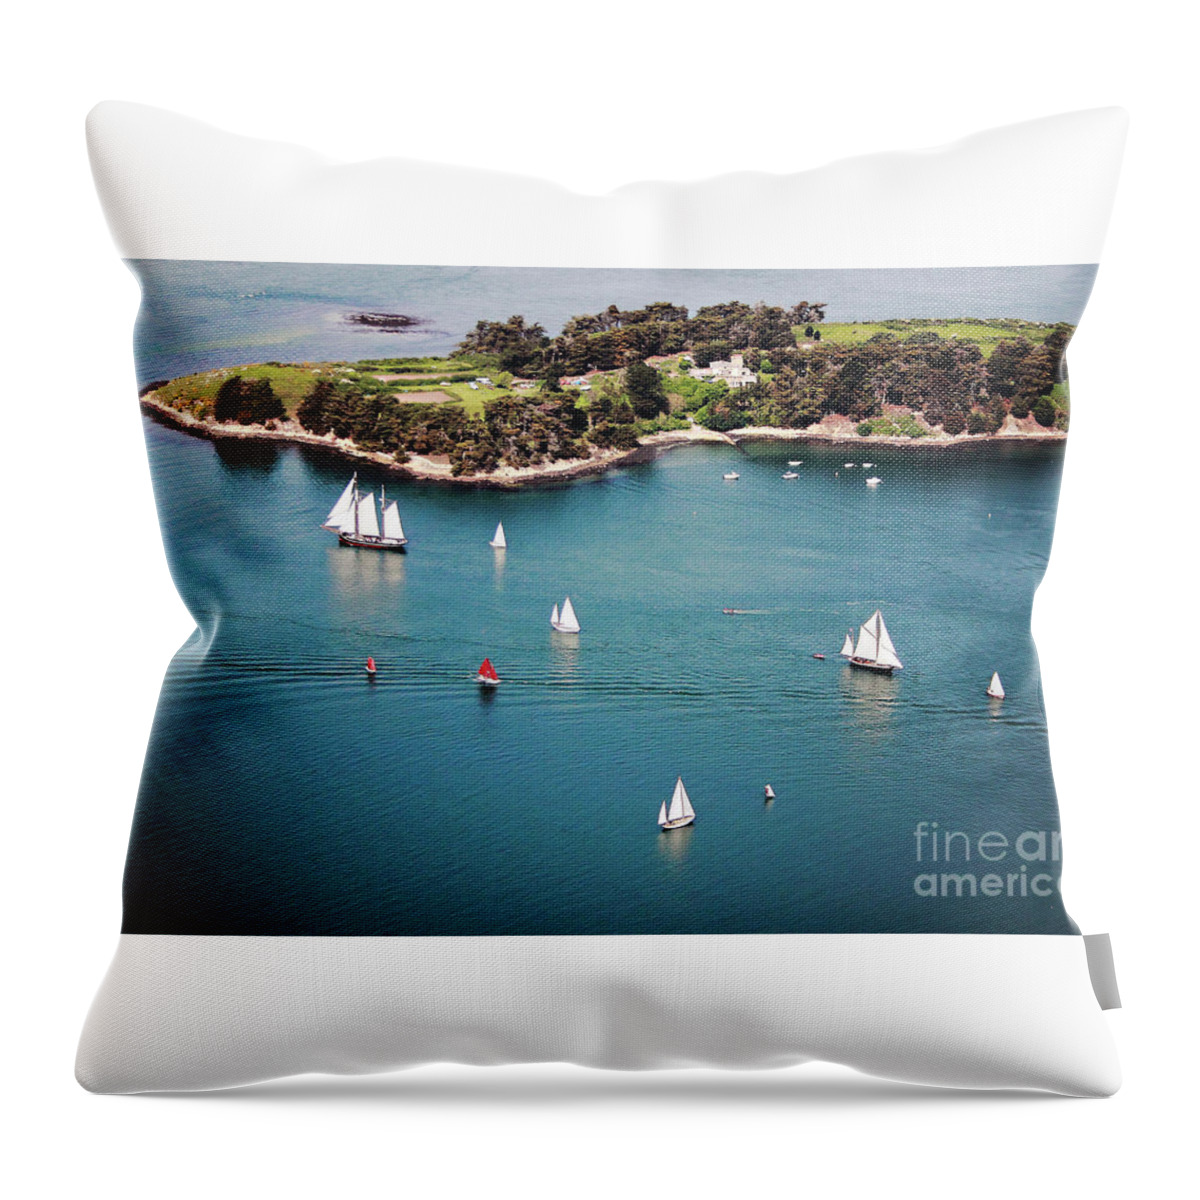 Ile Throw Pillow featuring the photograph Ile-aux-Moines Pointe de Nioul by Frederic Bourrigaud